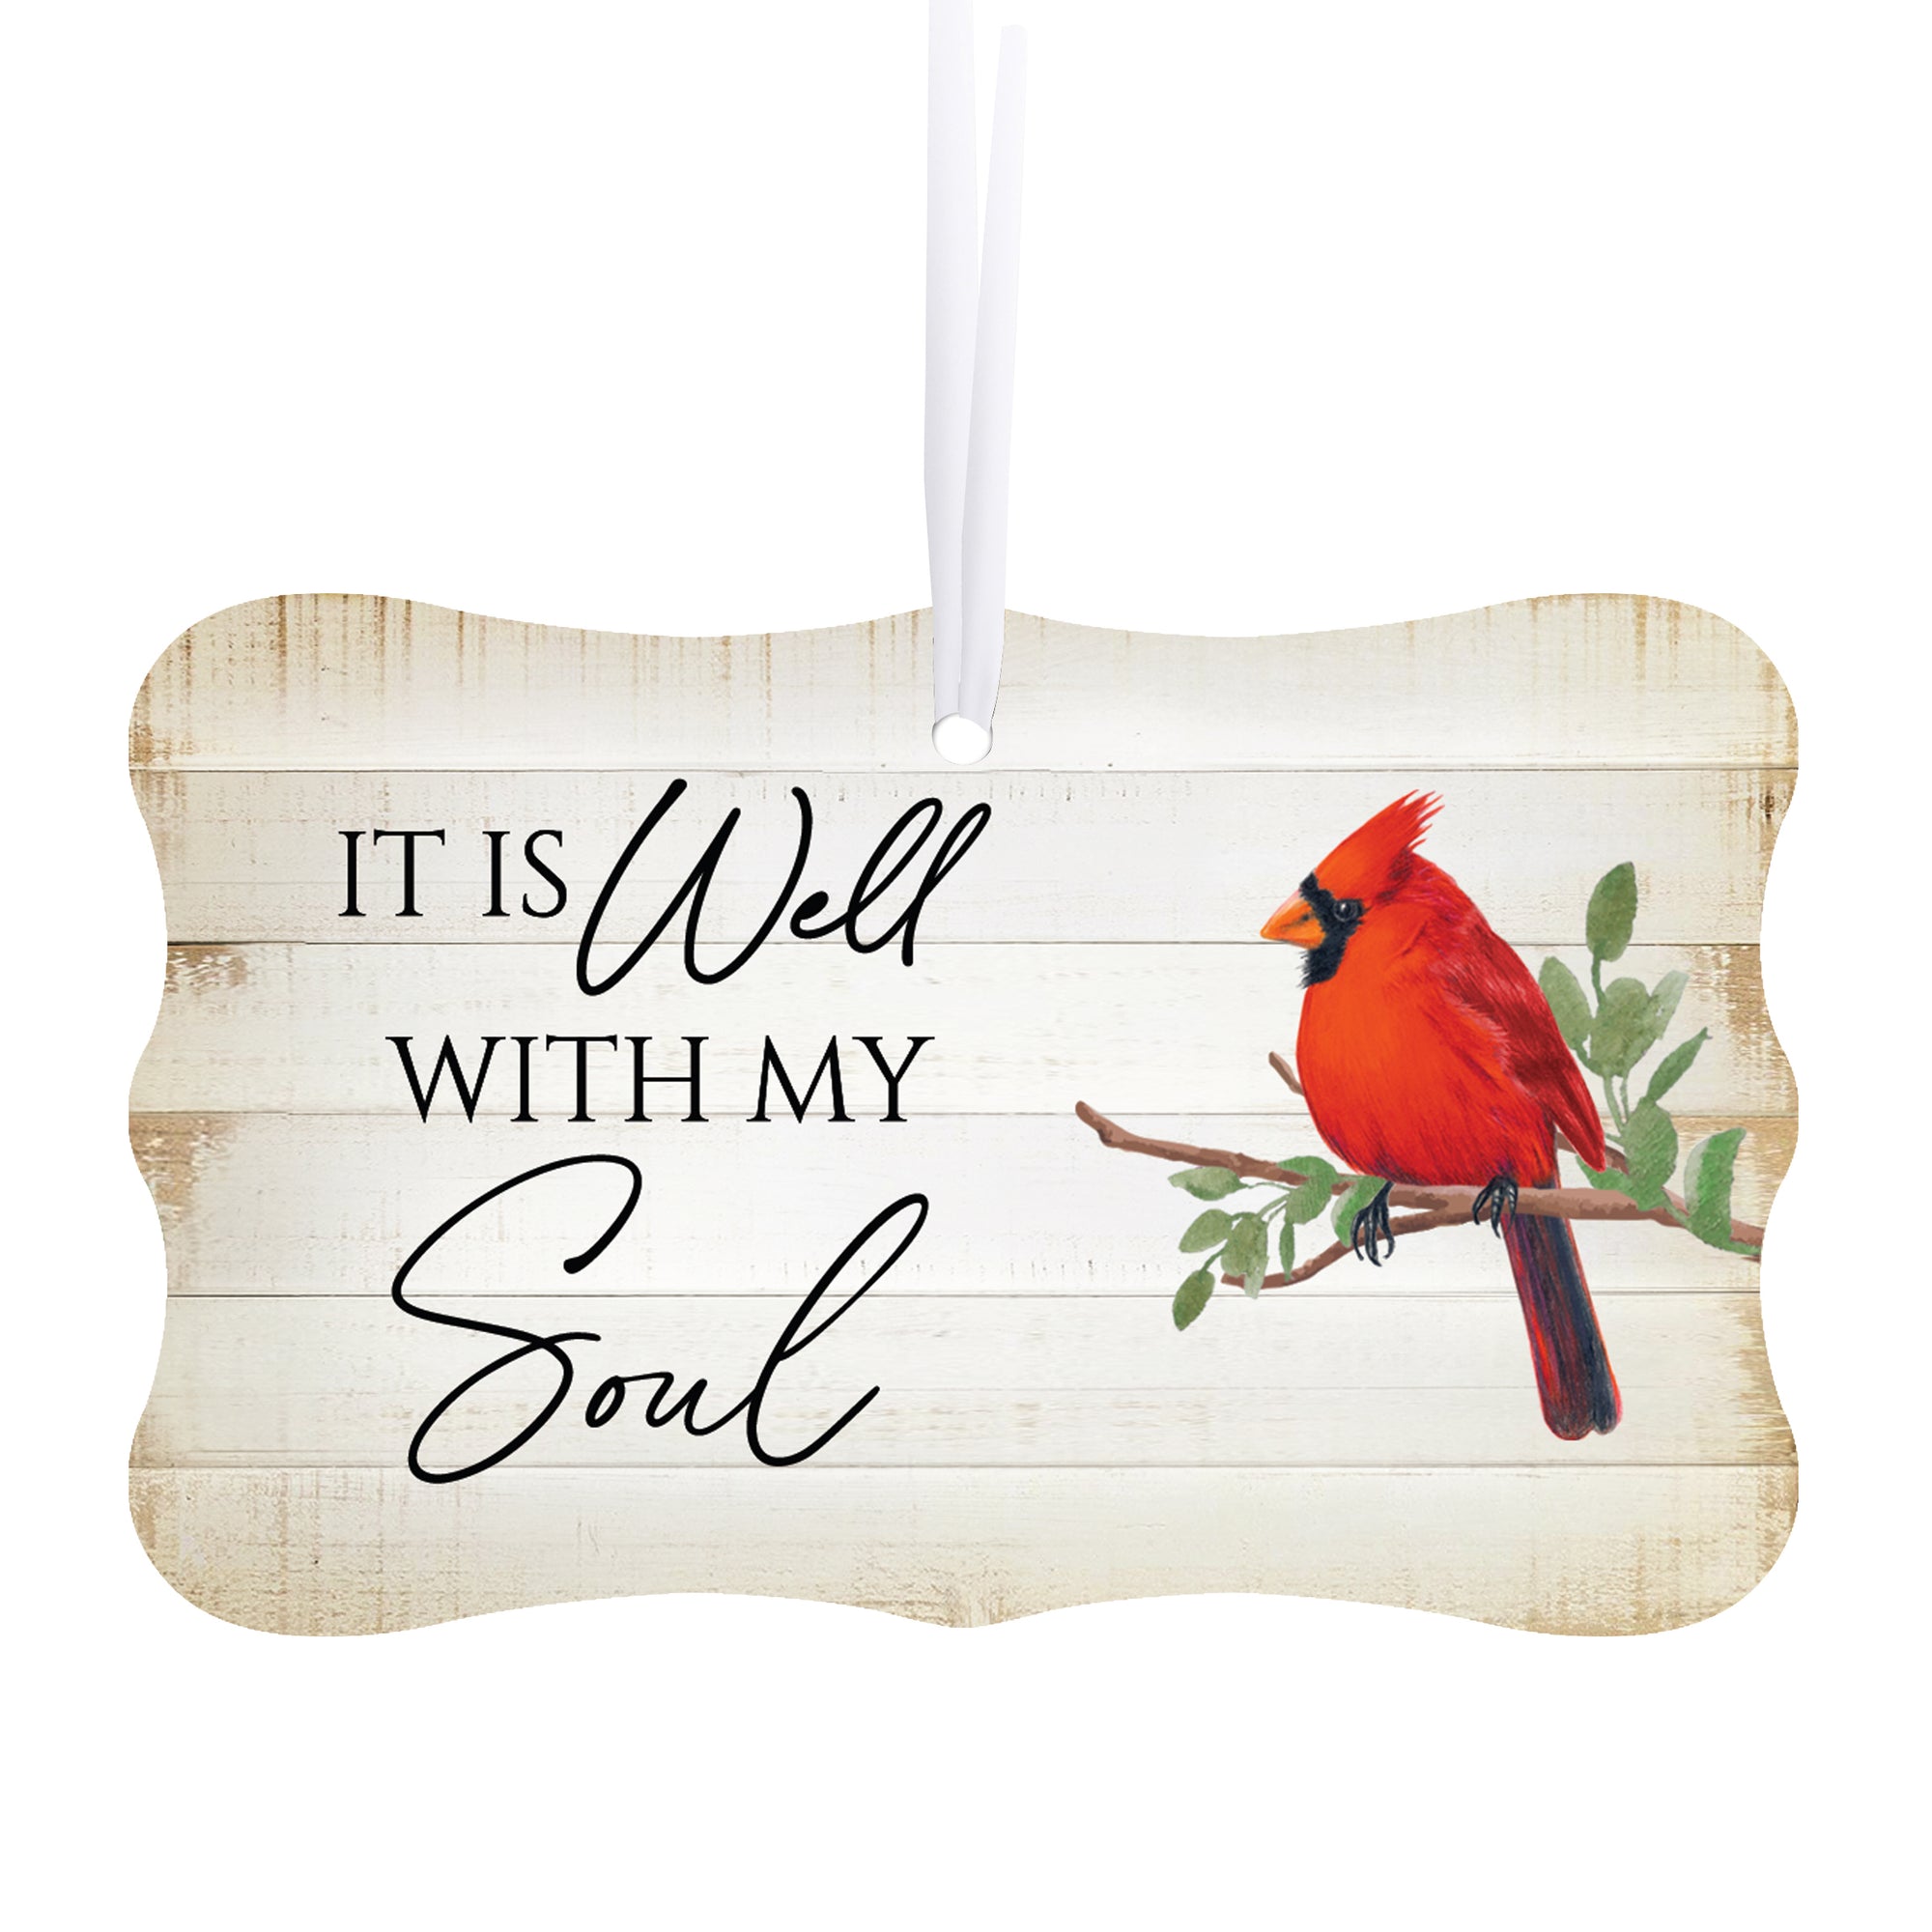 Rustic Scalloped Cardinal Wooden Ornament With Everyday Verses Gift Ideas - It Is Well